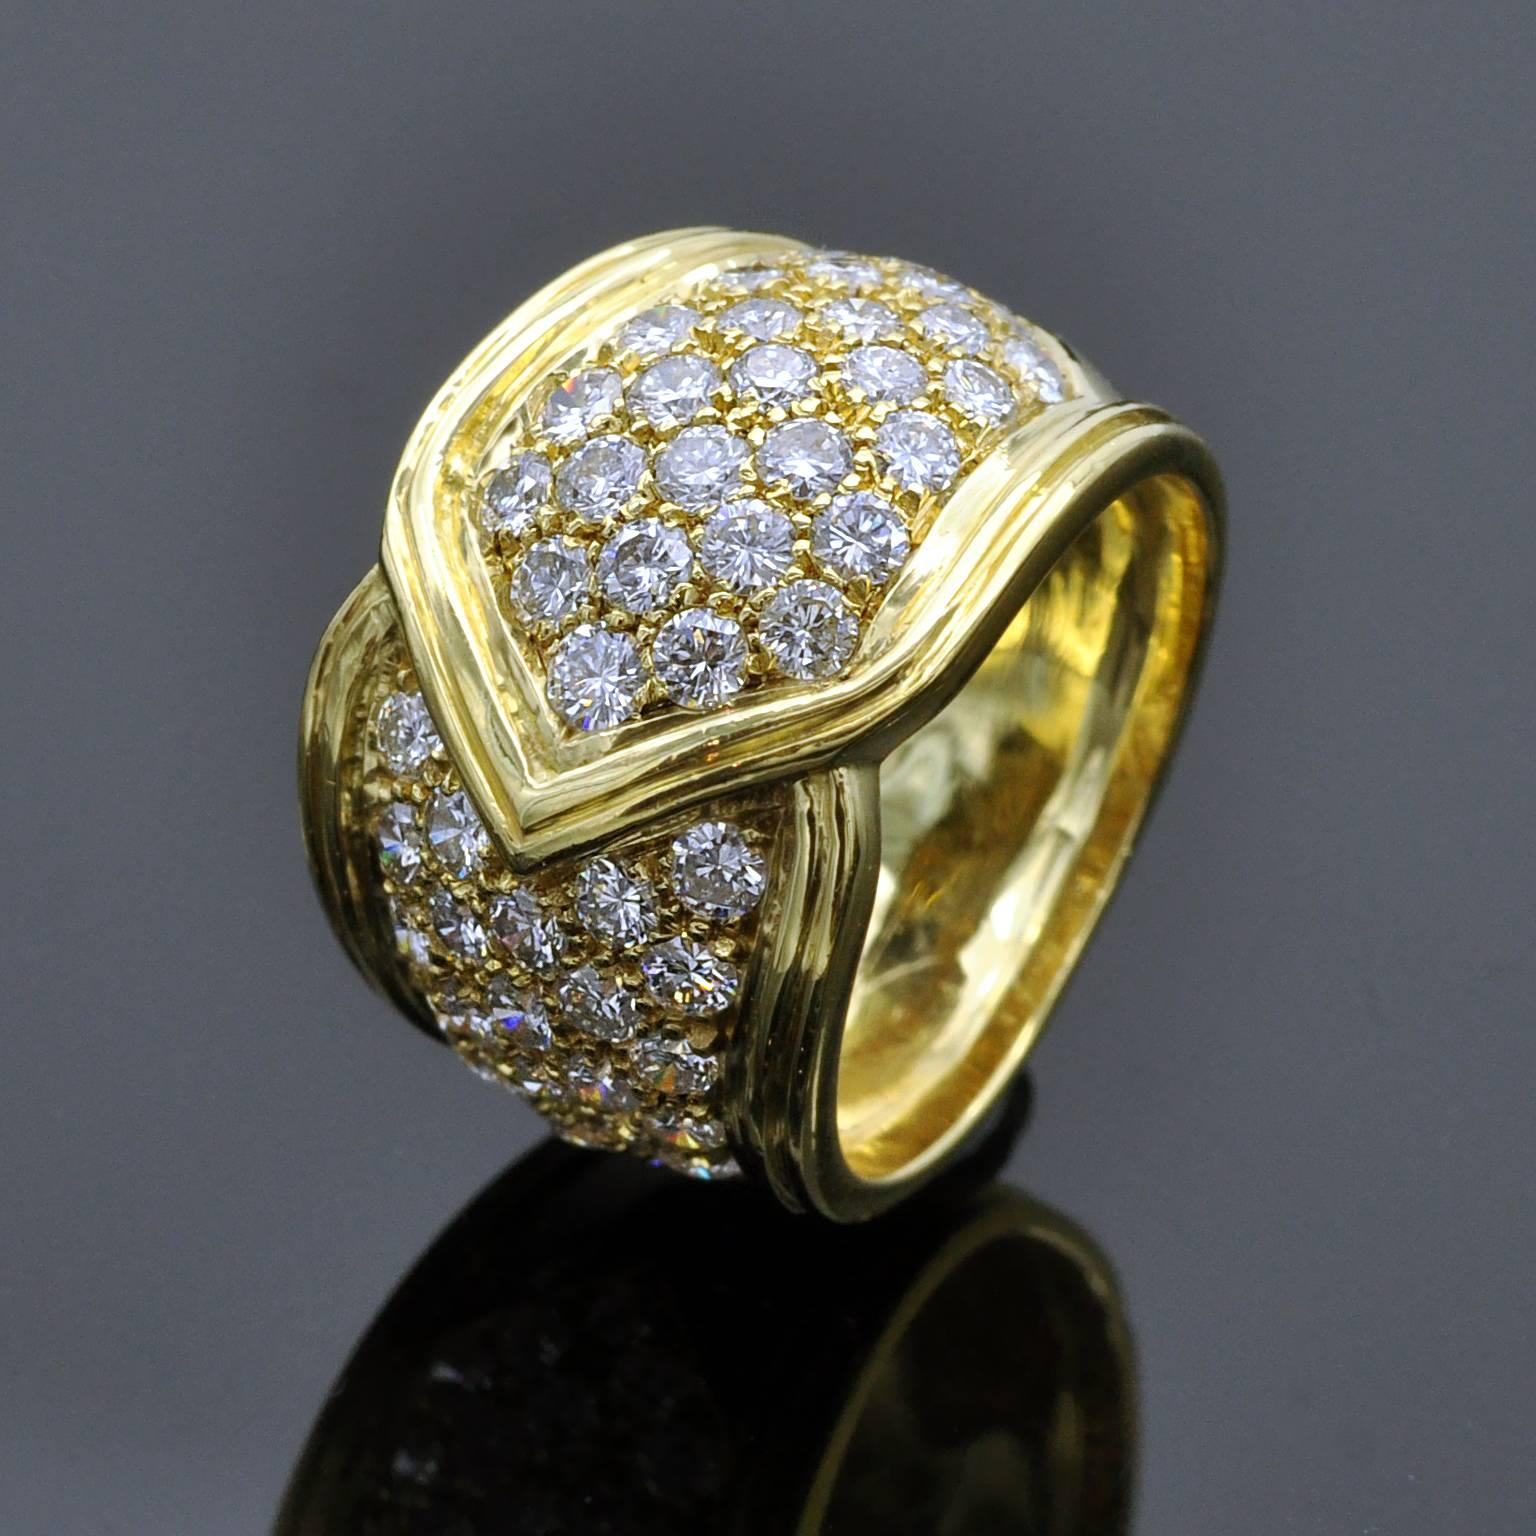 Matching set composed of a 18 kt yellow gold Clip-on earrings and ring.
The ring consist of a wide band elegantly wrapped around the finger. Both ring and earrings are pave-set with approx. 3.85 carat of white brilliant cut diamonds ( FG VS )
This